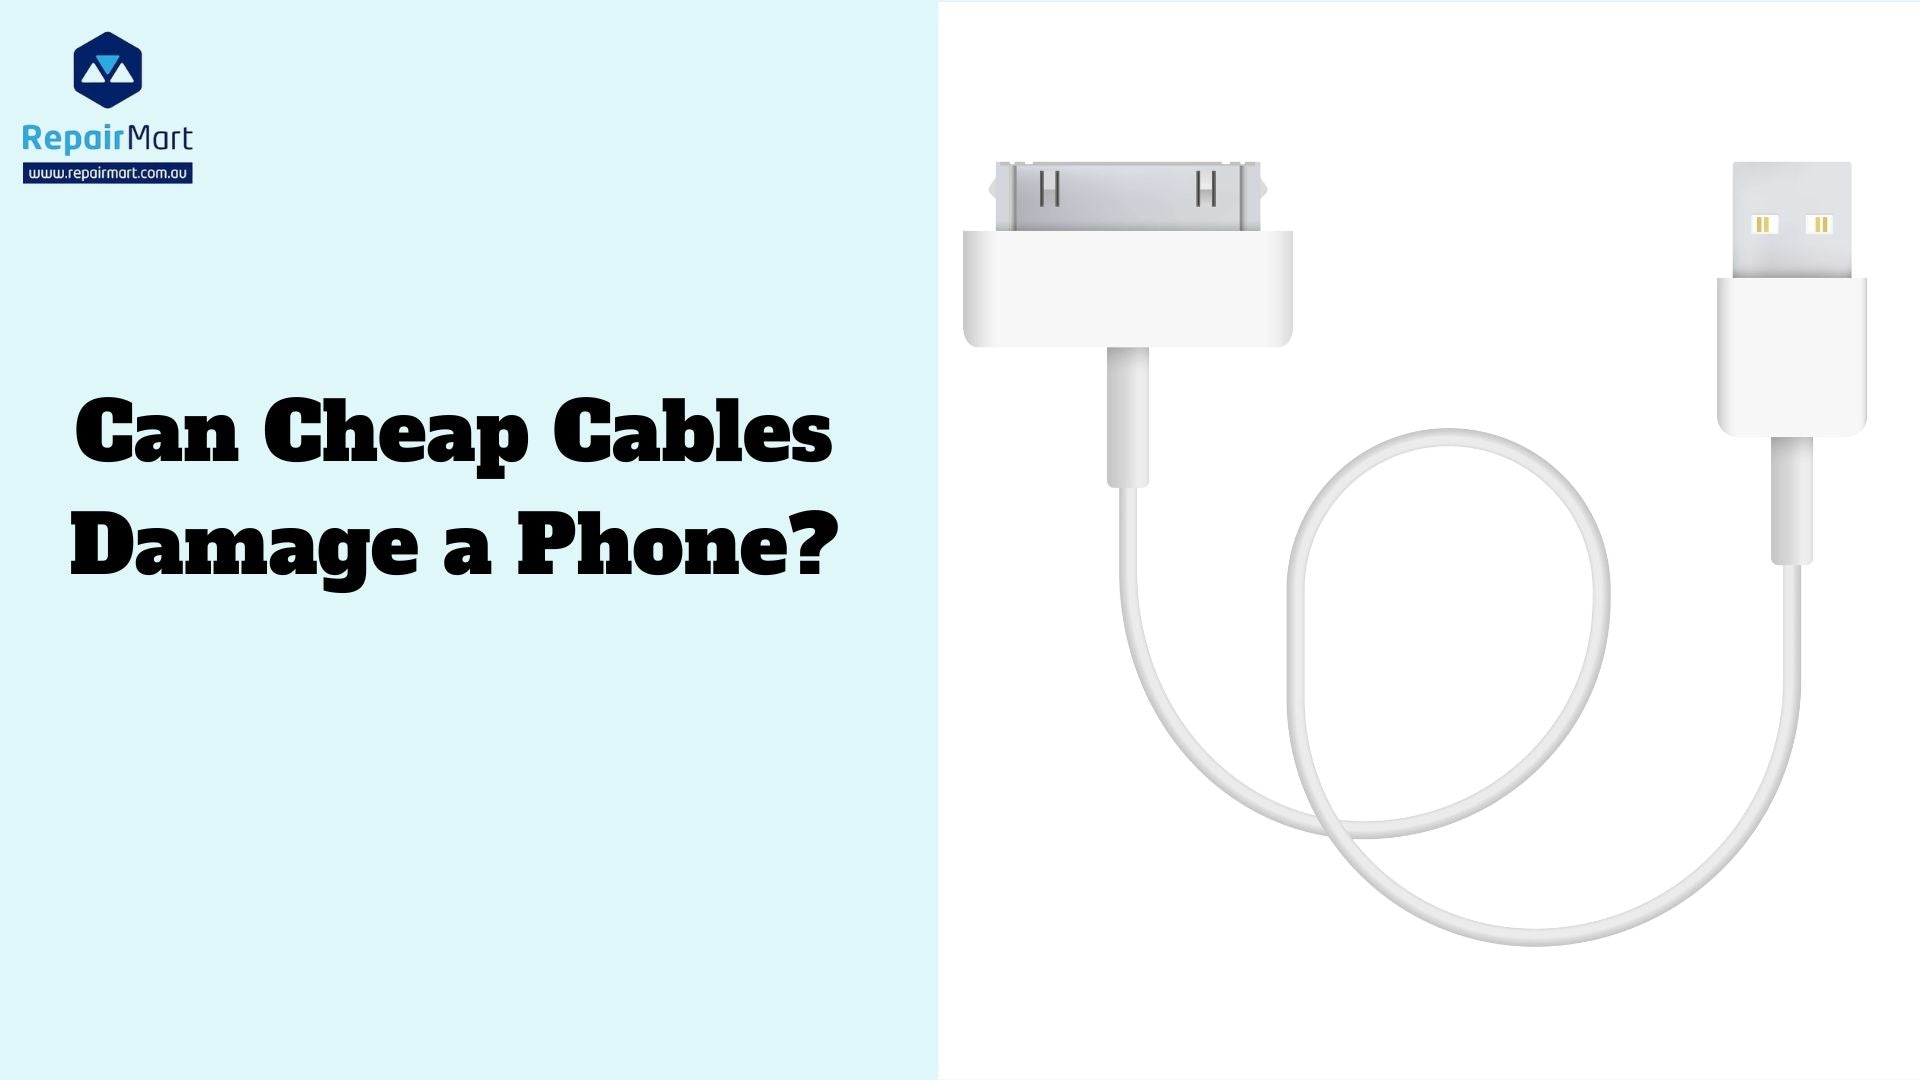 Can Cheap Cables Damage a Phone?